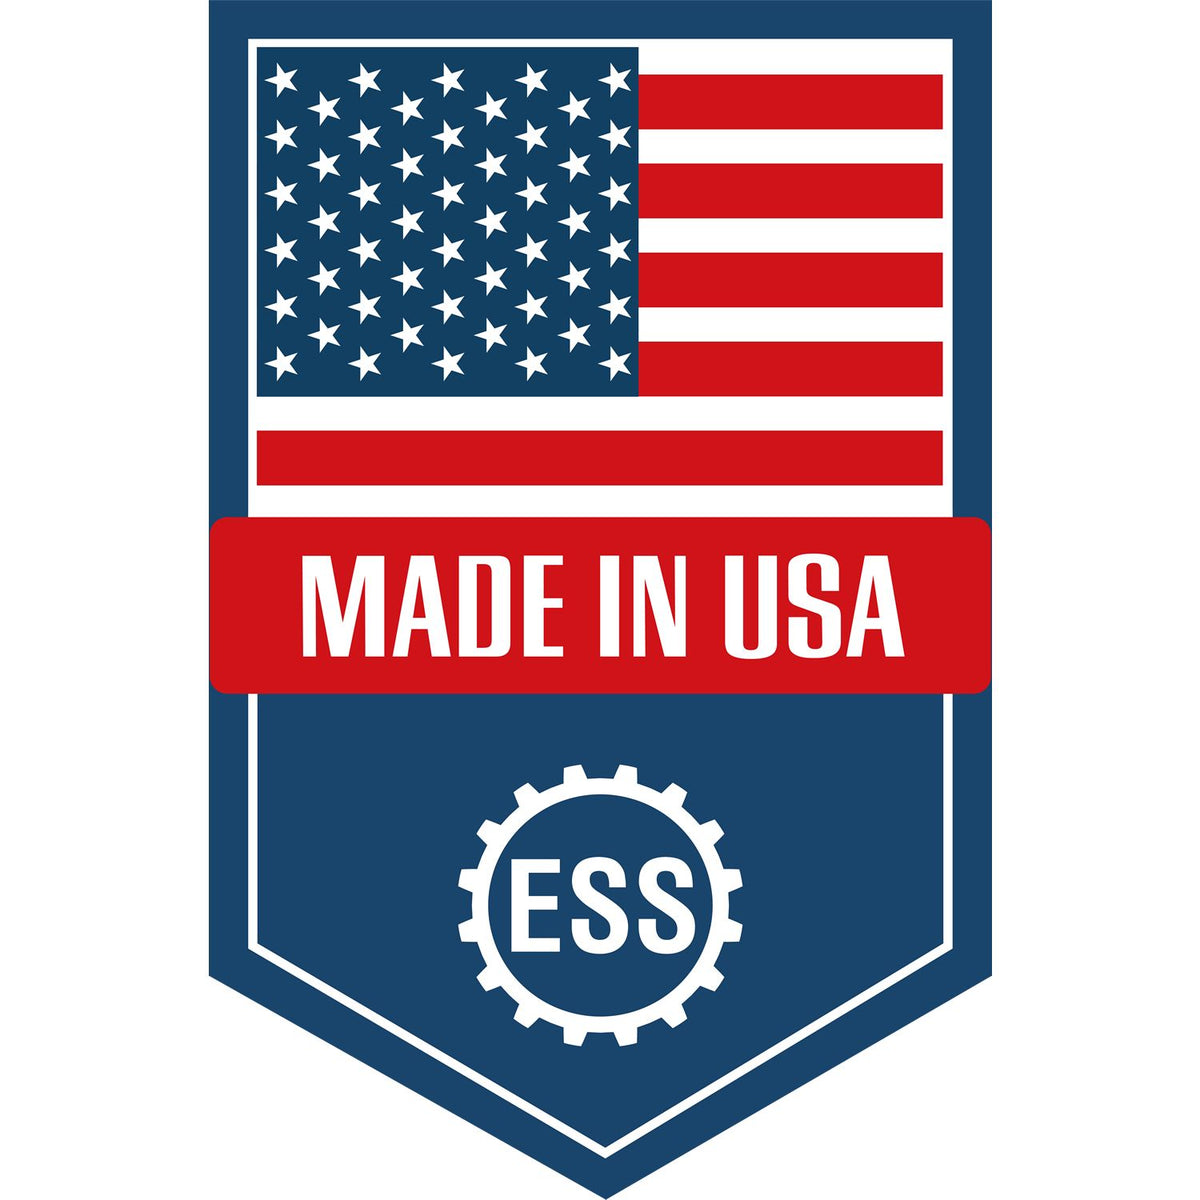 An icon or graphic with an american flag and text reading Made in USA for the Florida Landscape Architectural Seal Stamp